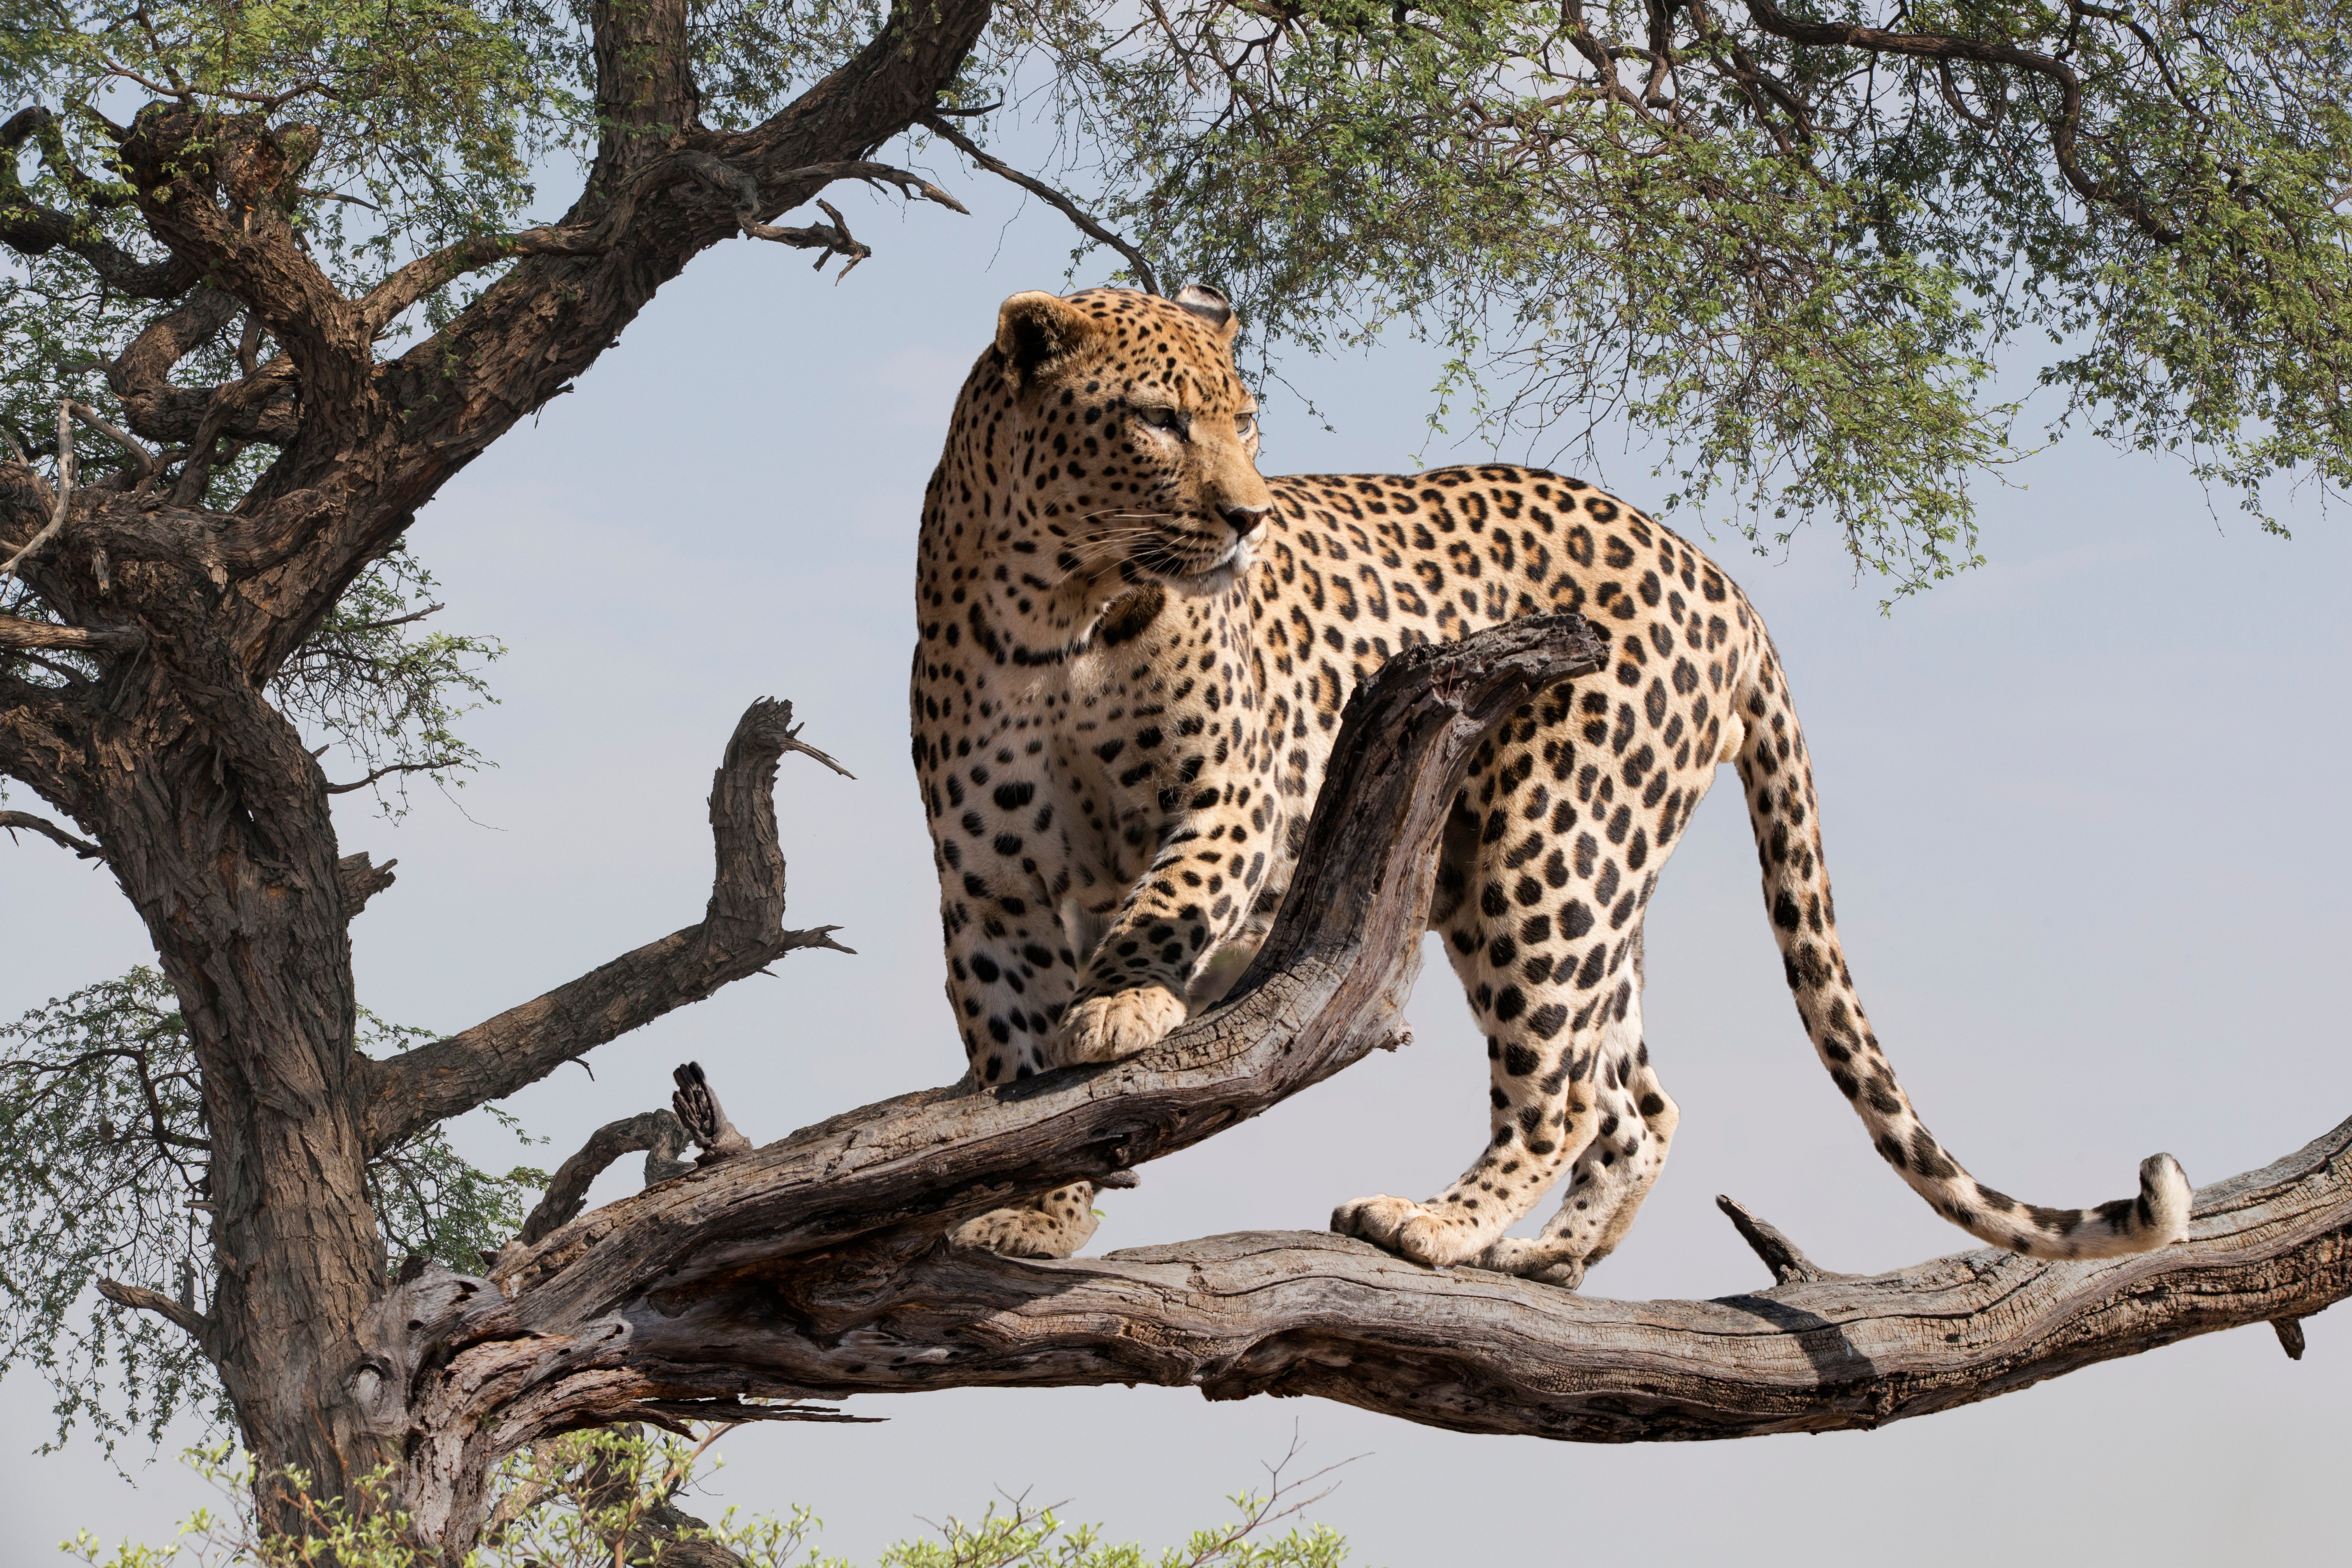 A leopard on tree branch looking out into the distance | Photo: Shutterstock